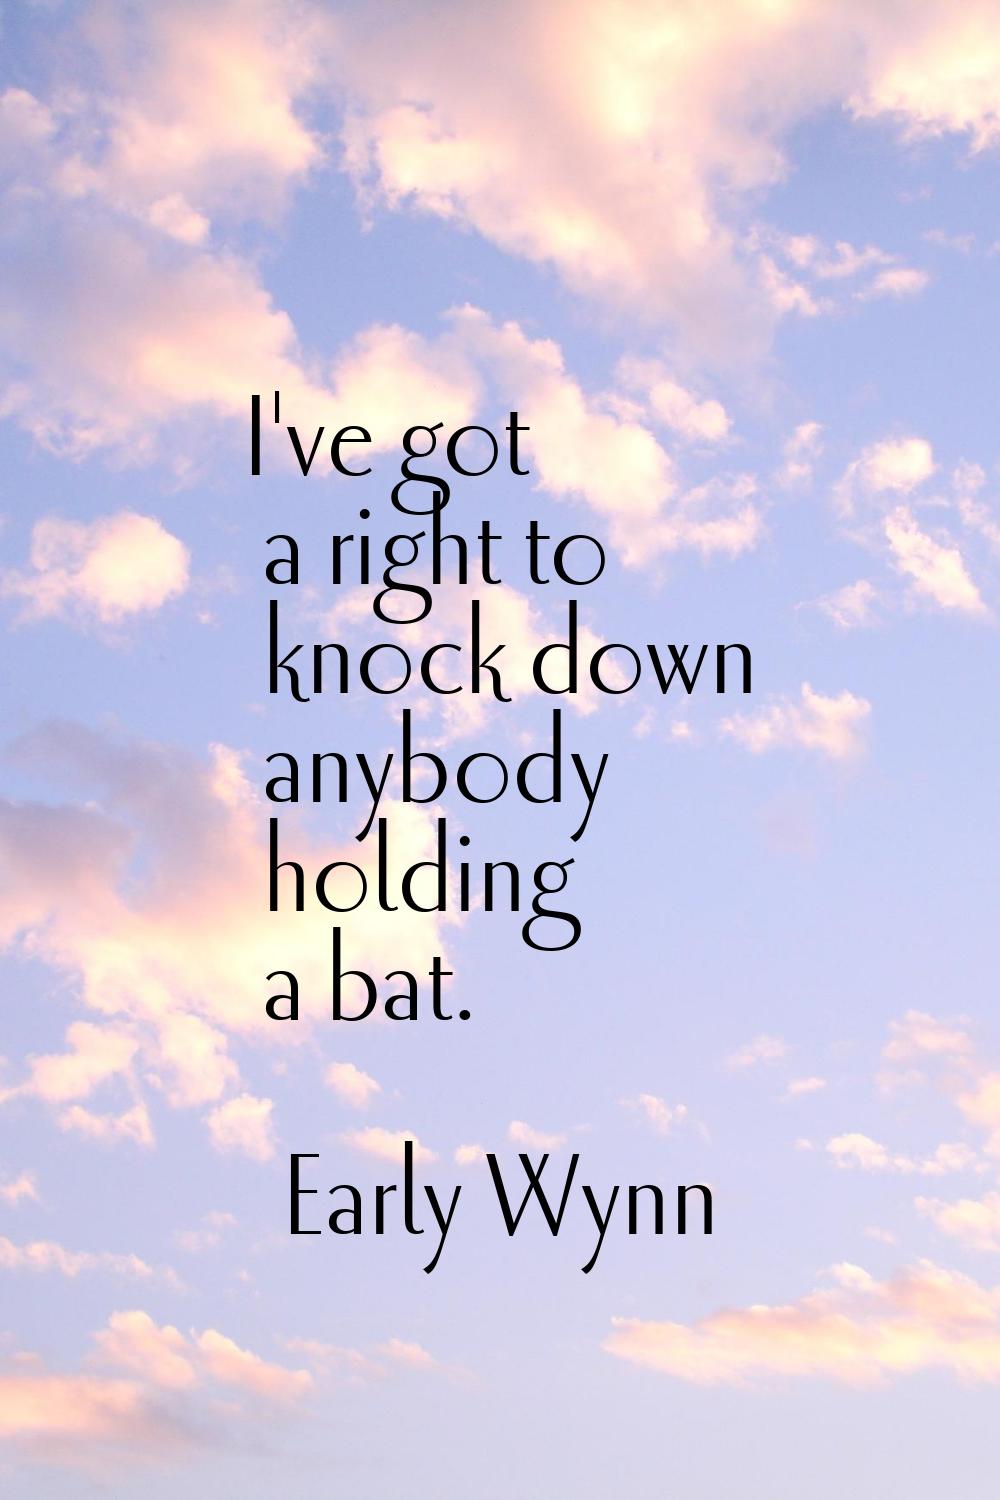 I've got a right to knock down anybody holding a bat.